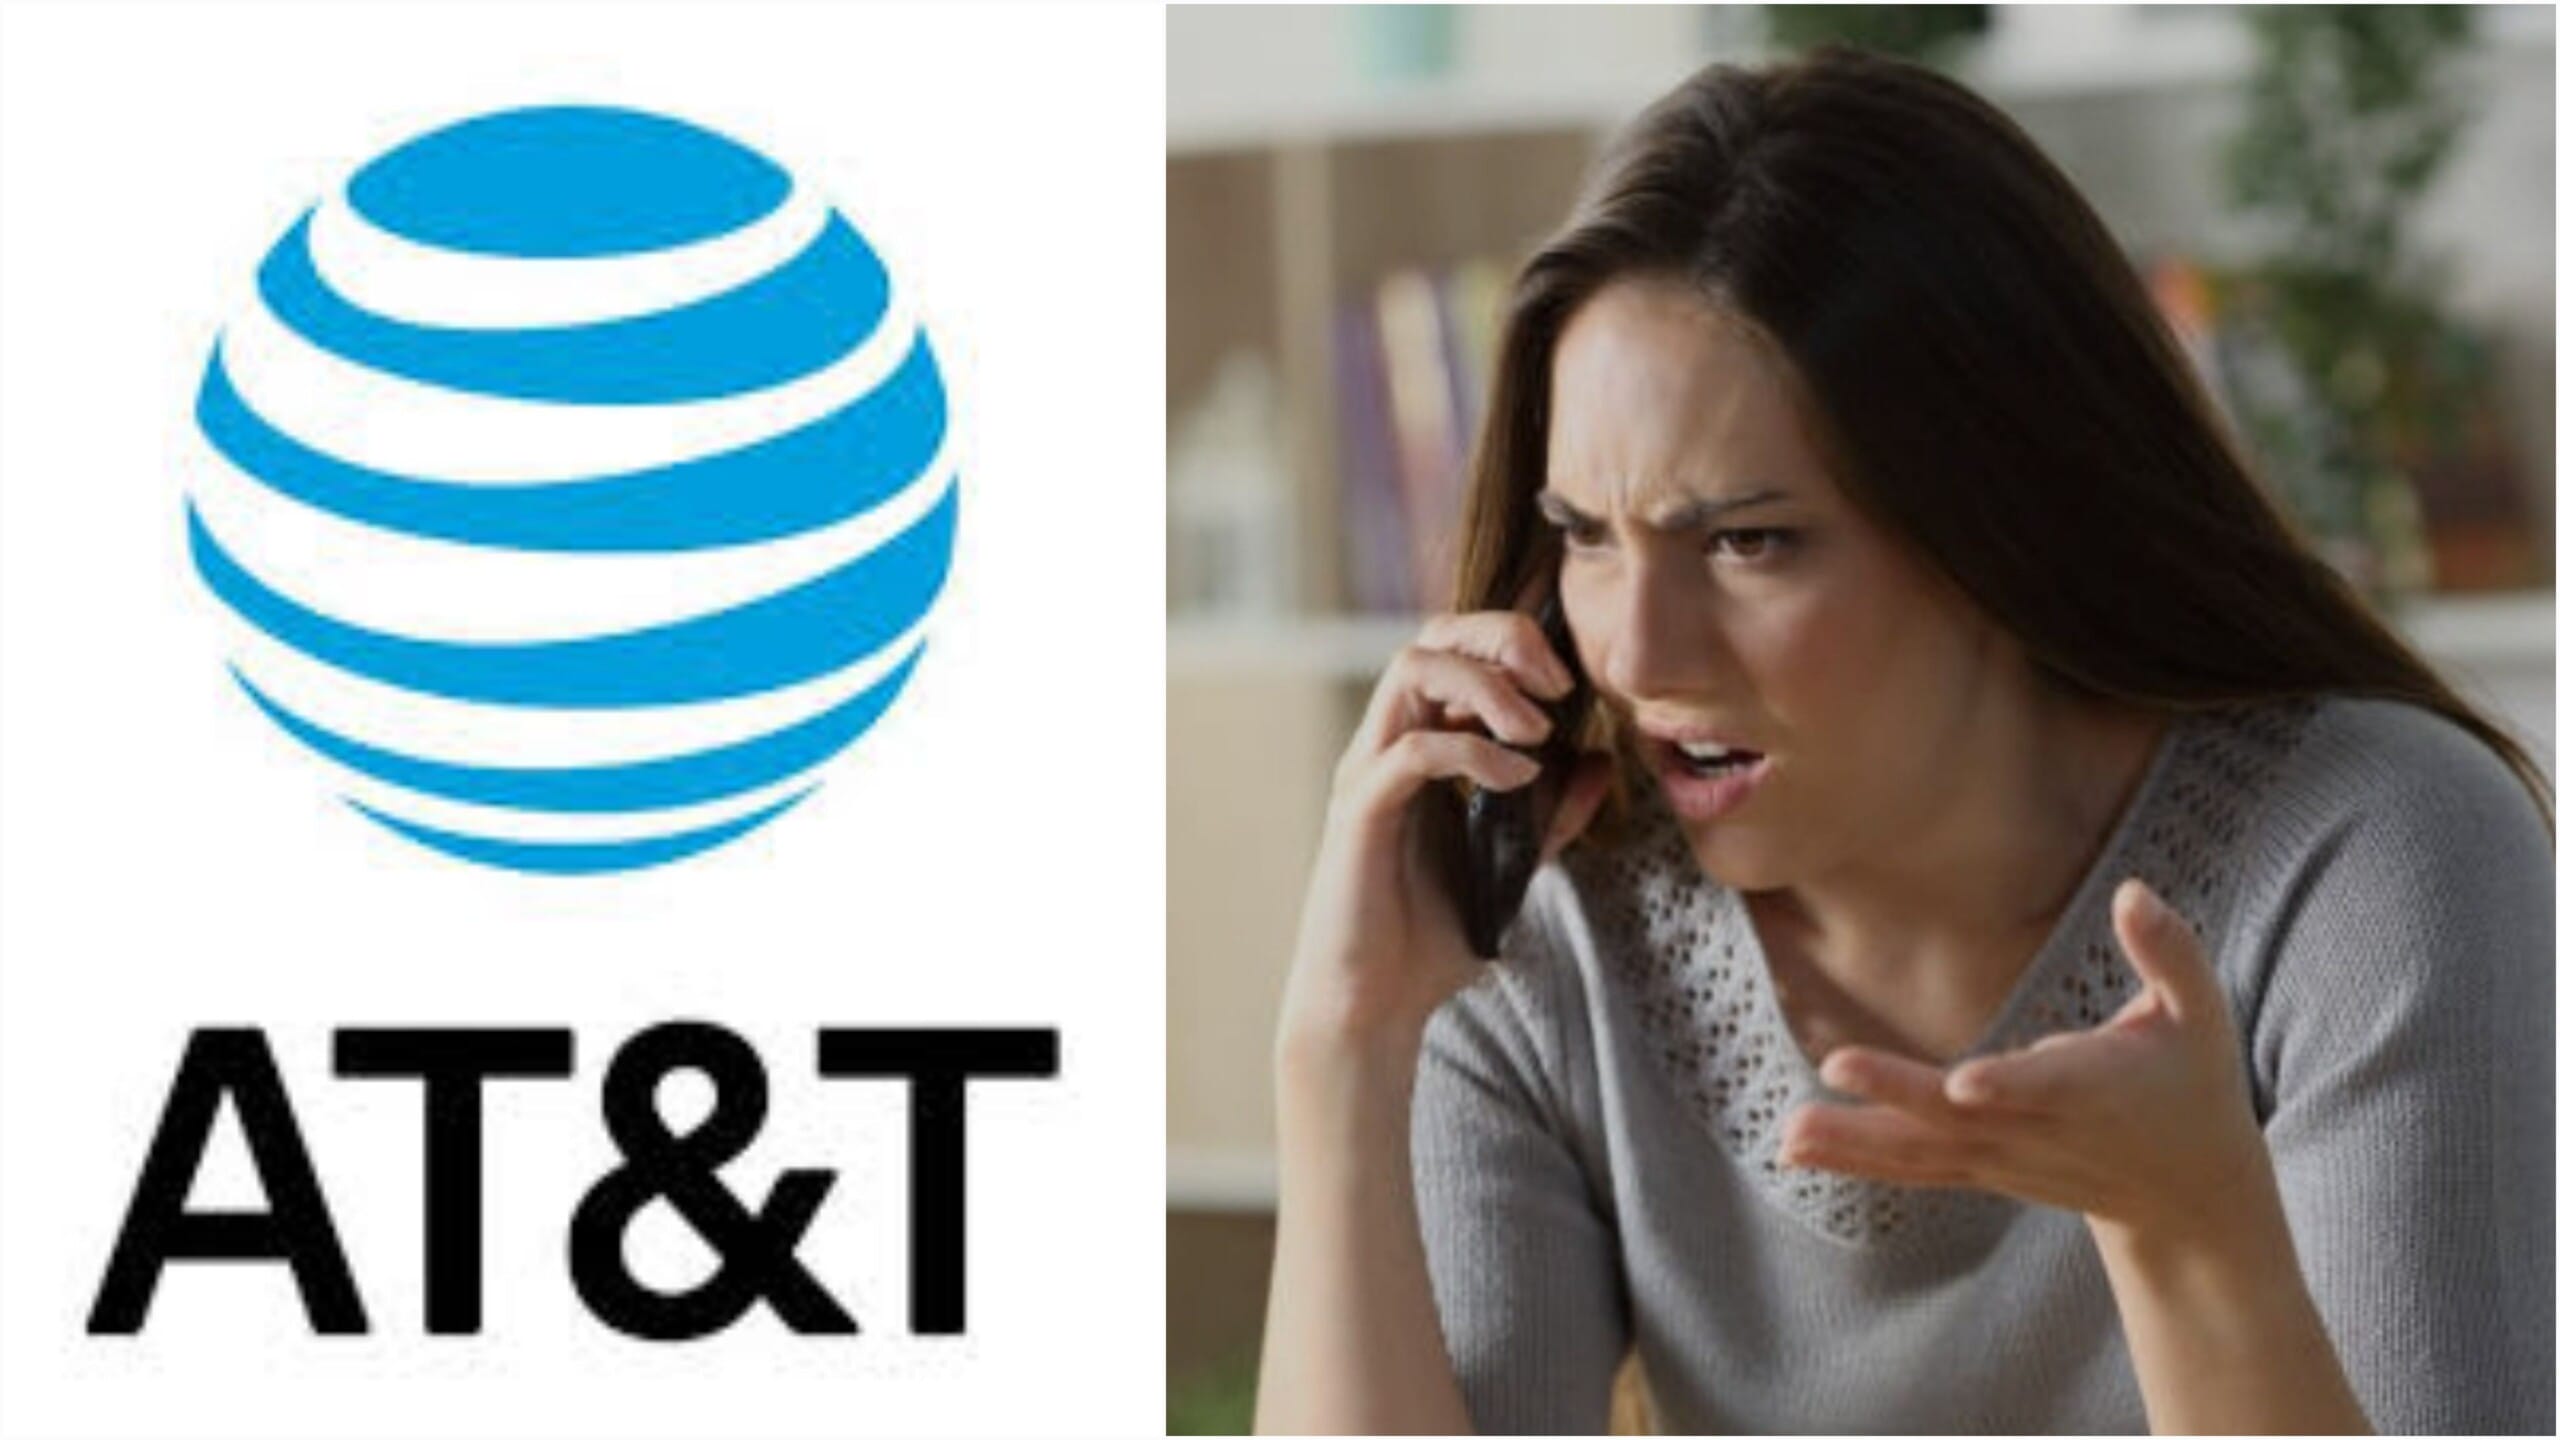 If you're an AT&T customer, do this in response to the data breach of millions in the US